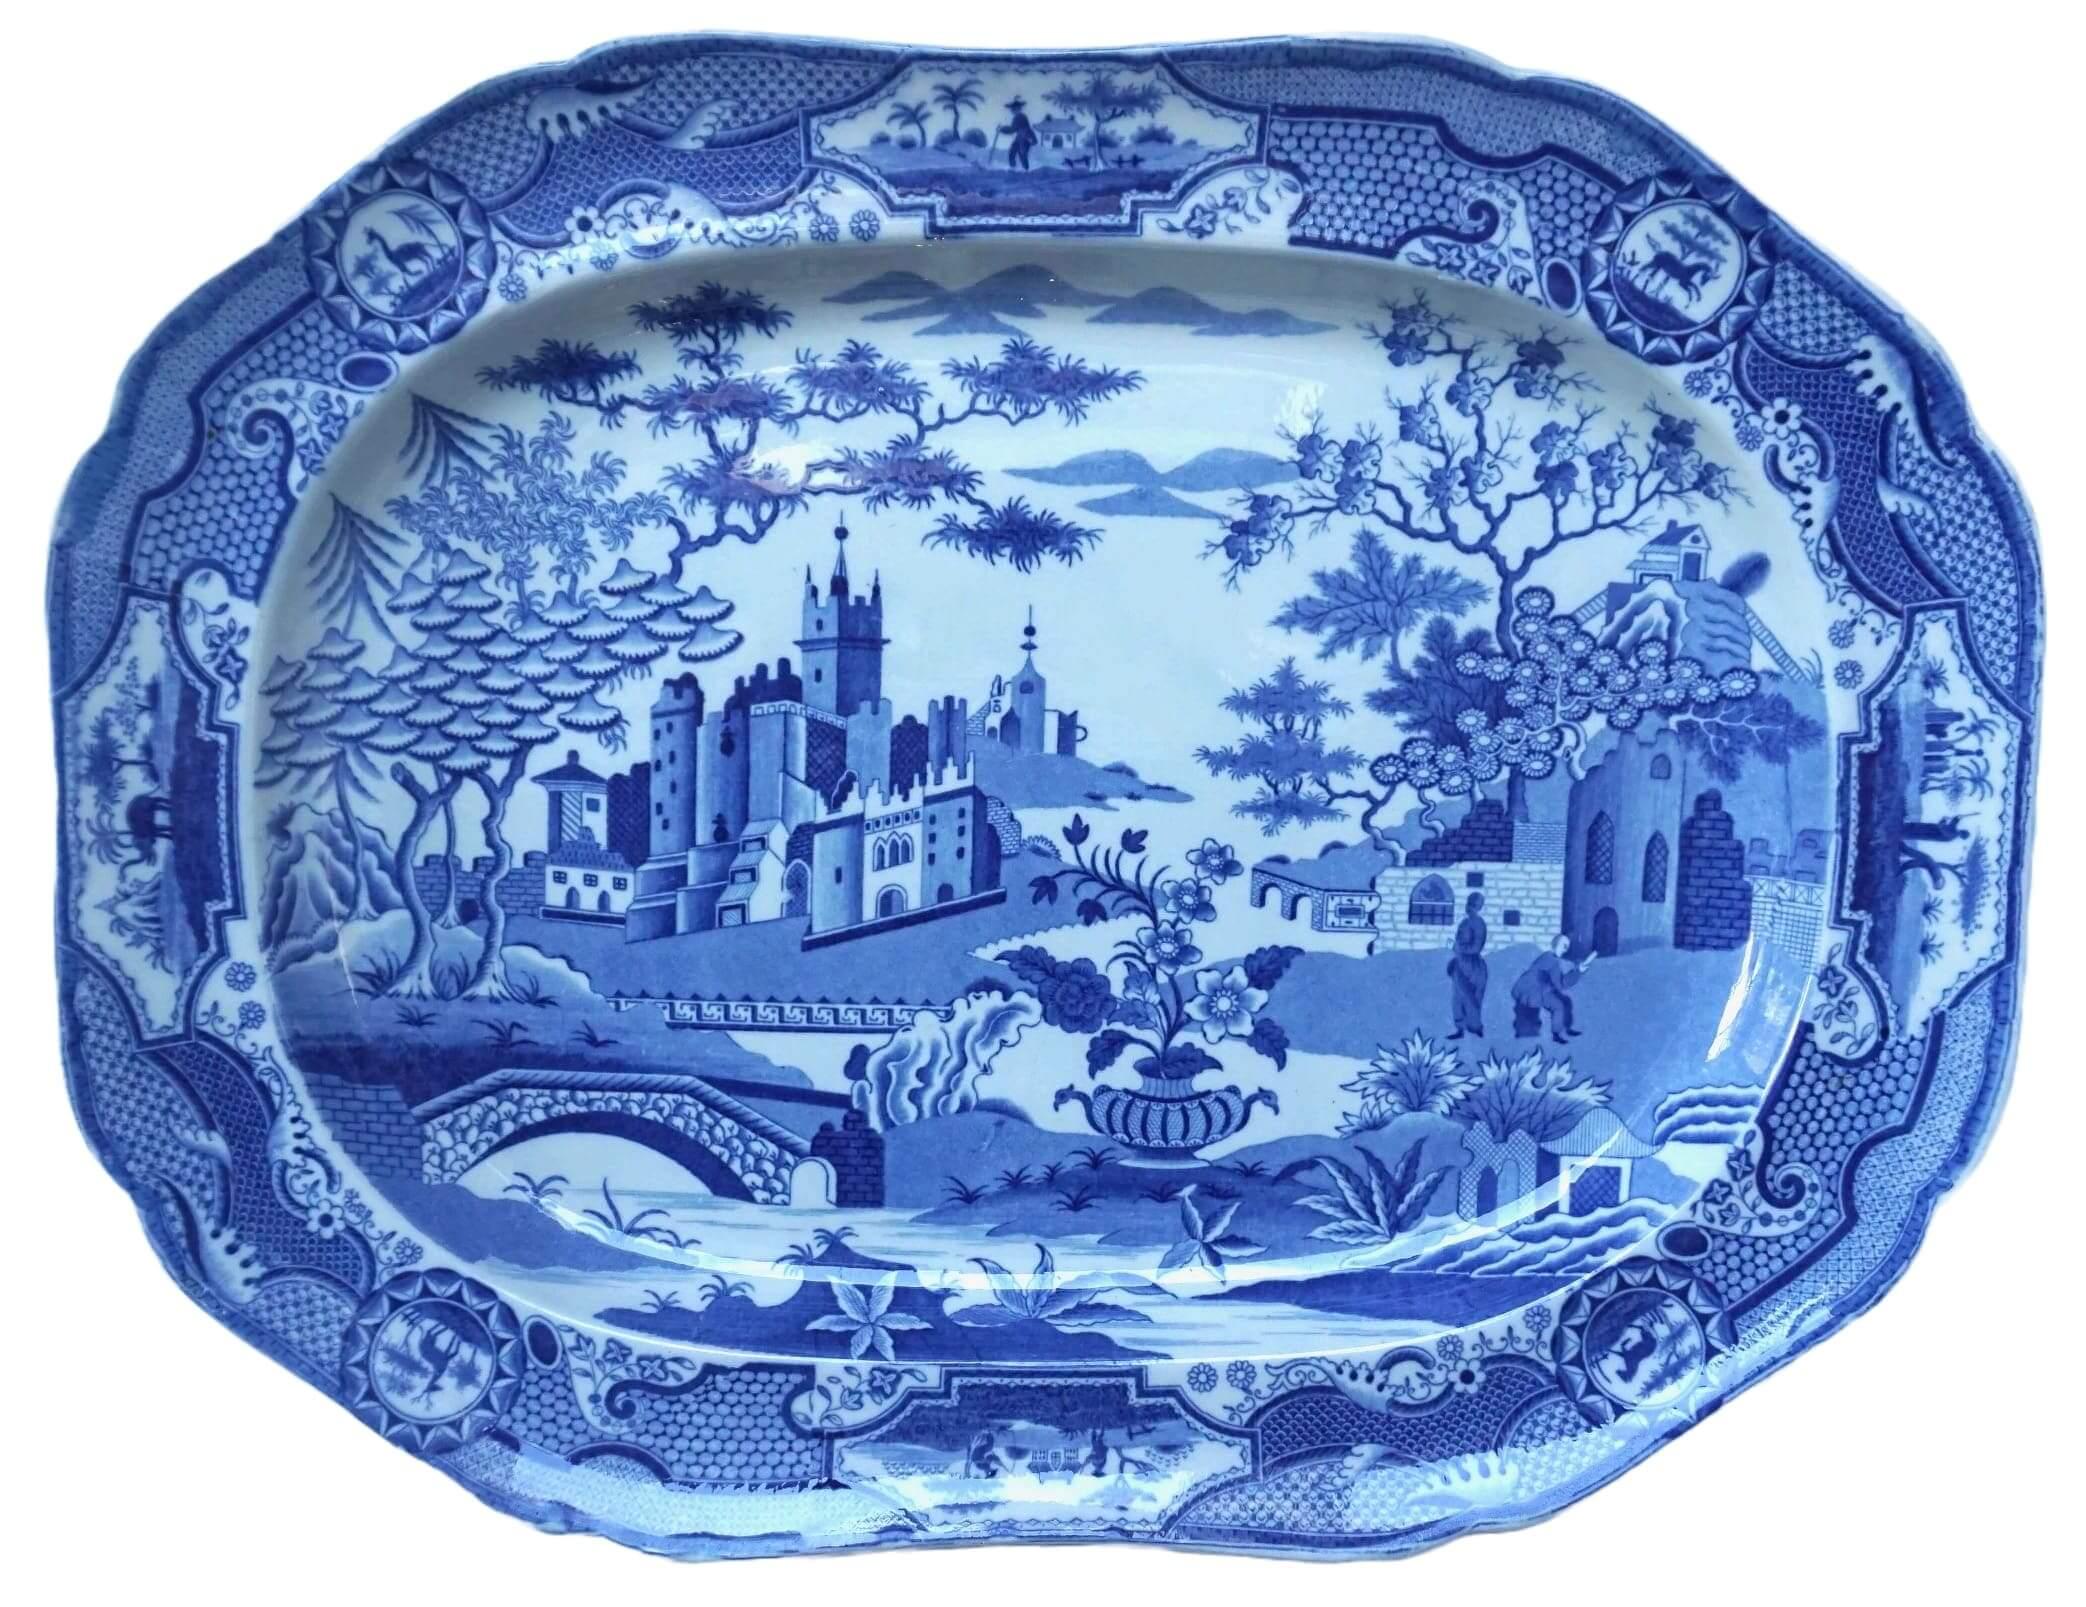 Spode 'Gothic Castles' Large Blue and White Staffordshire Platter, circa 1815 For Sale 4